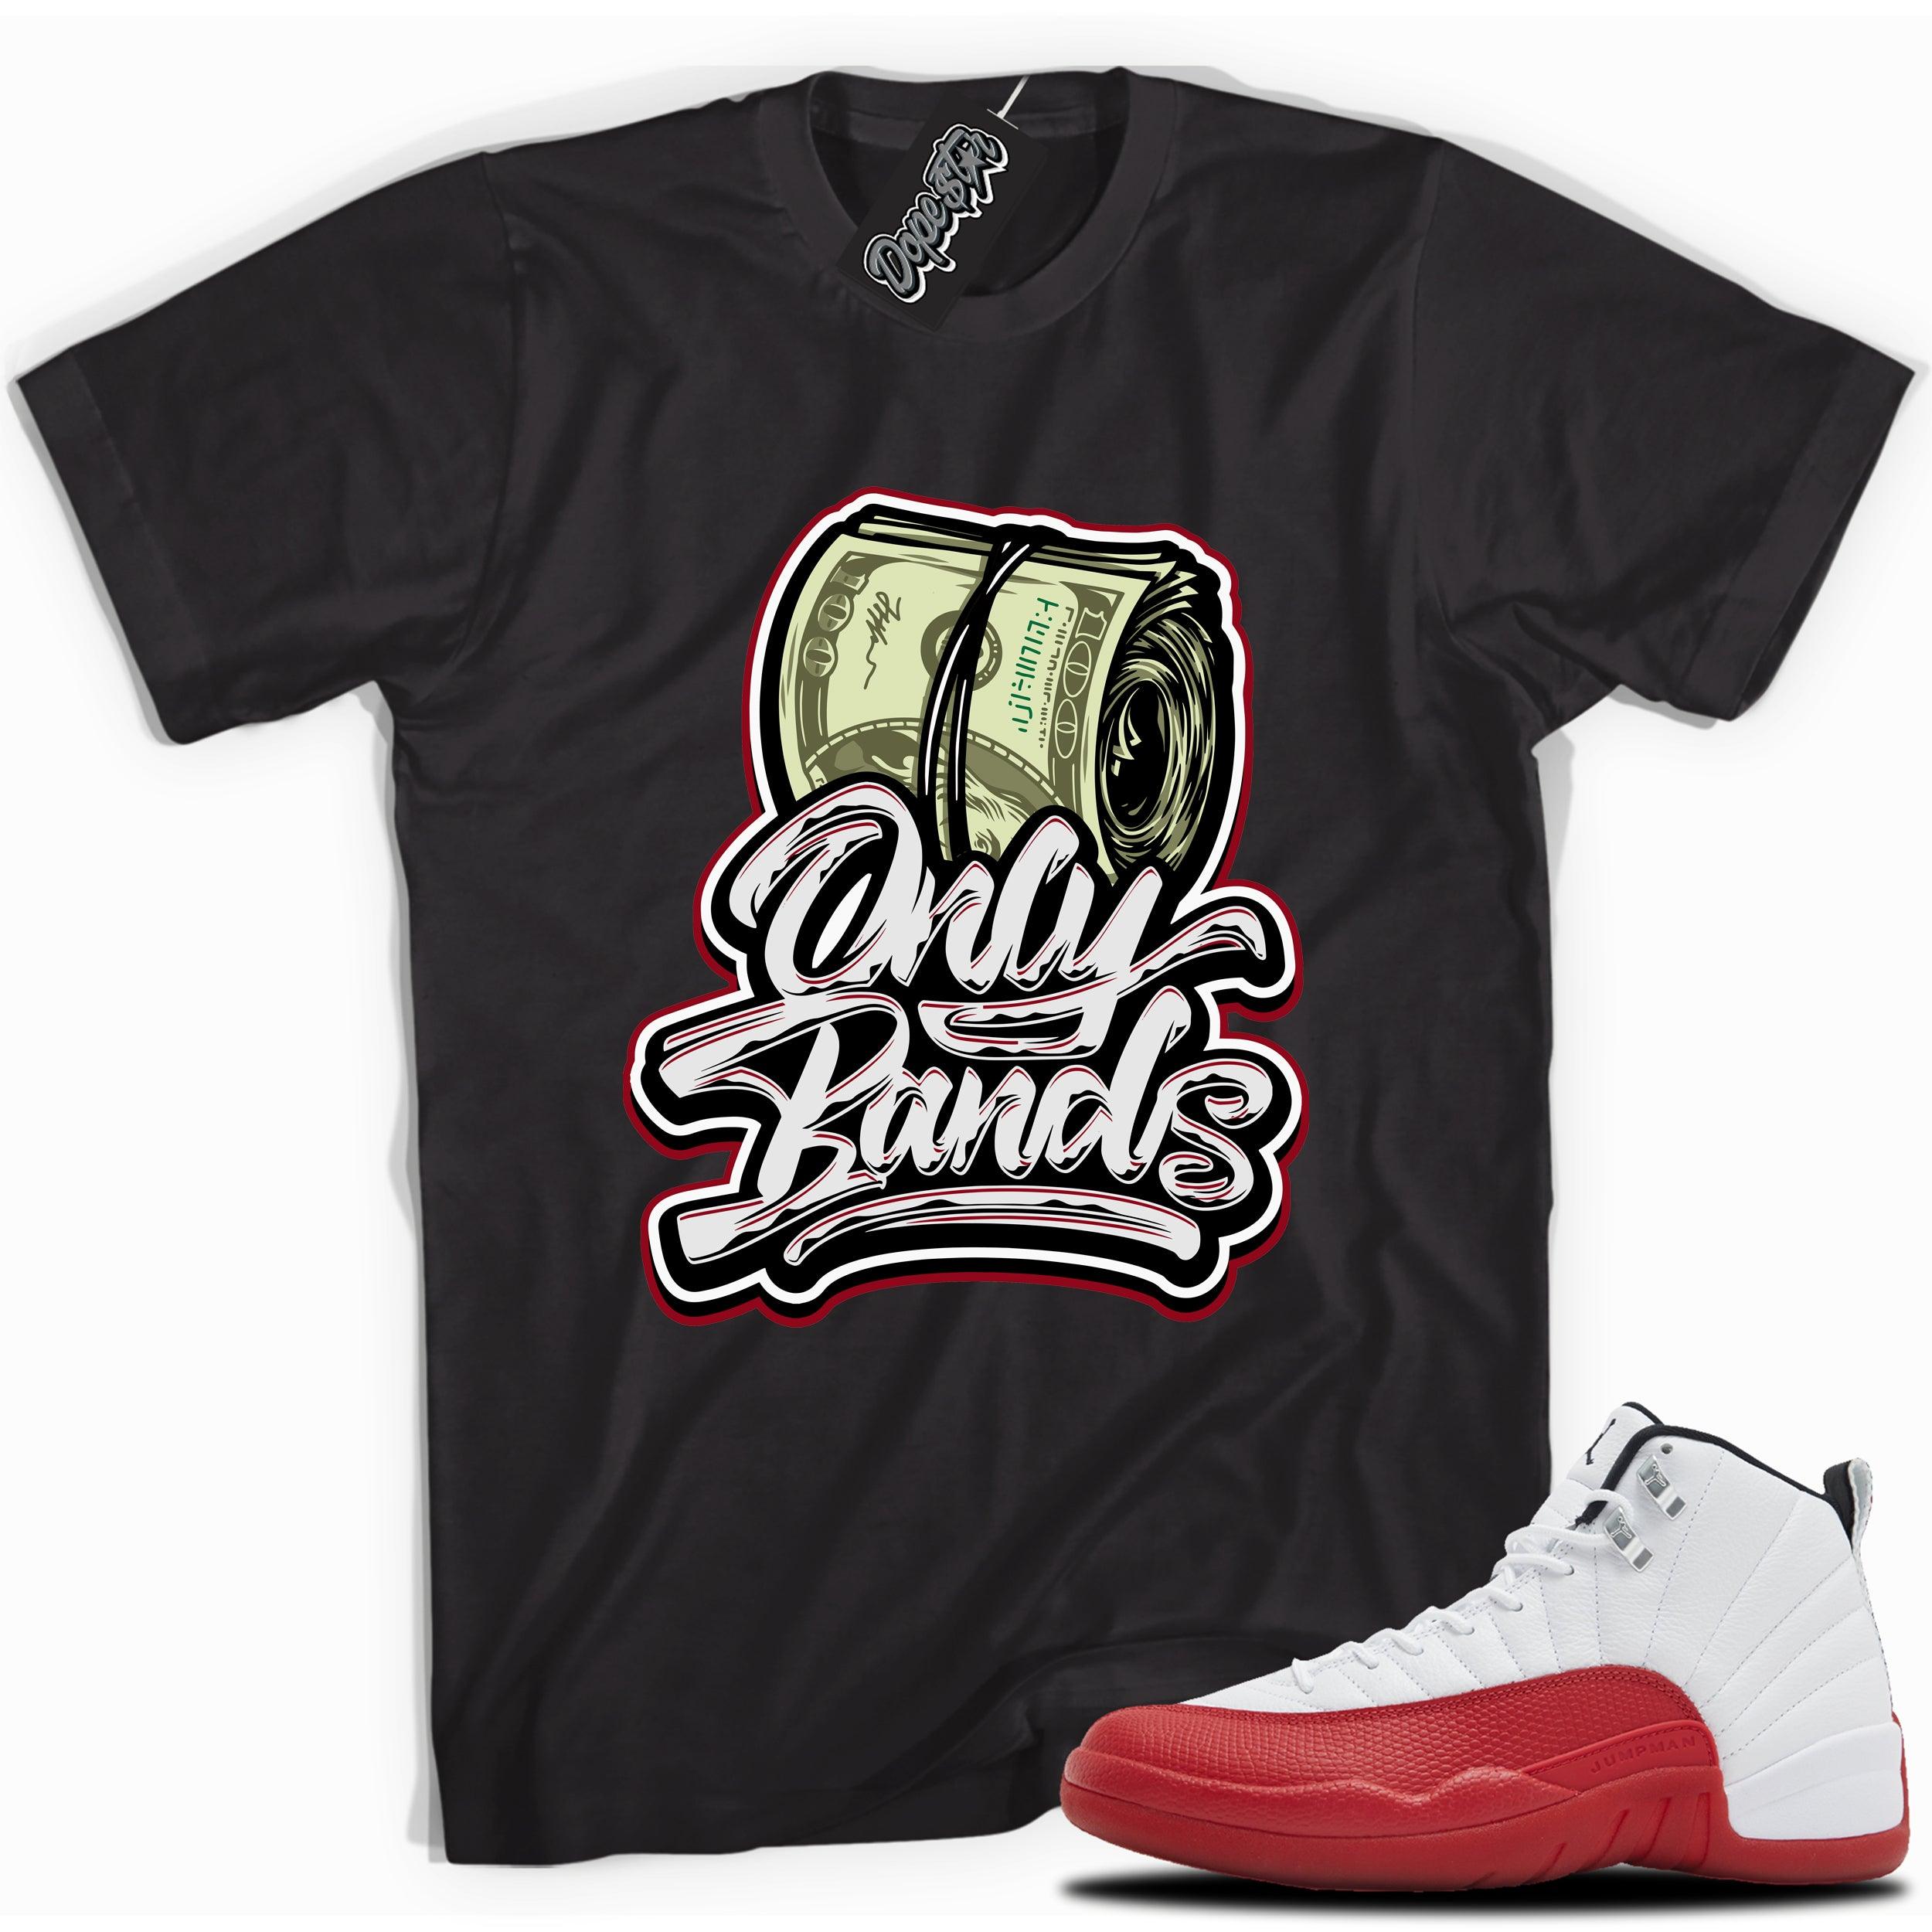 Cool Black graphic tee with “ONLY BANDS” print, that perfectly matches Air Jordan 12 Retro Cherry Red 2023 red and white sneakers 